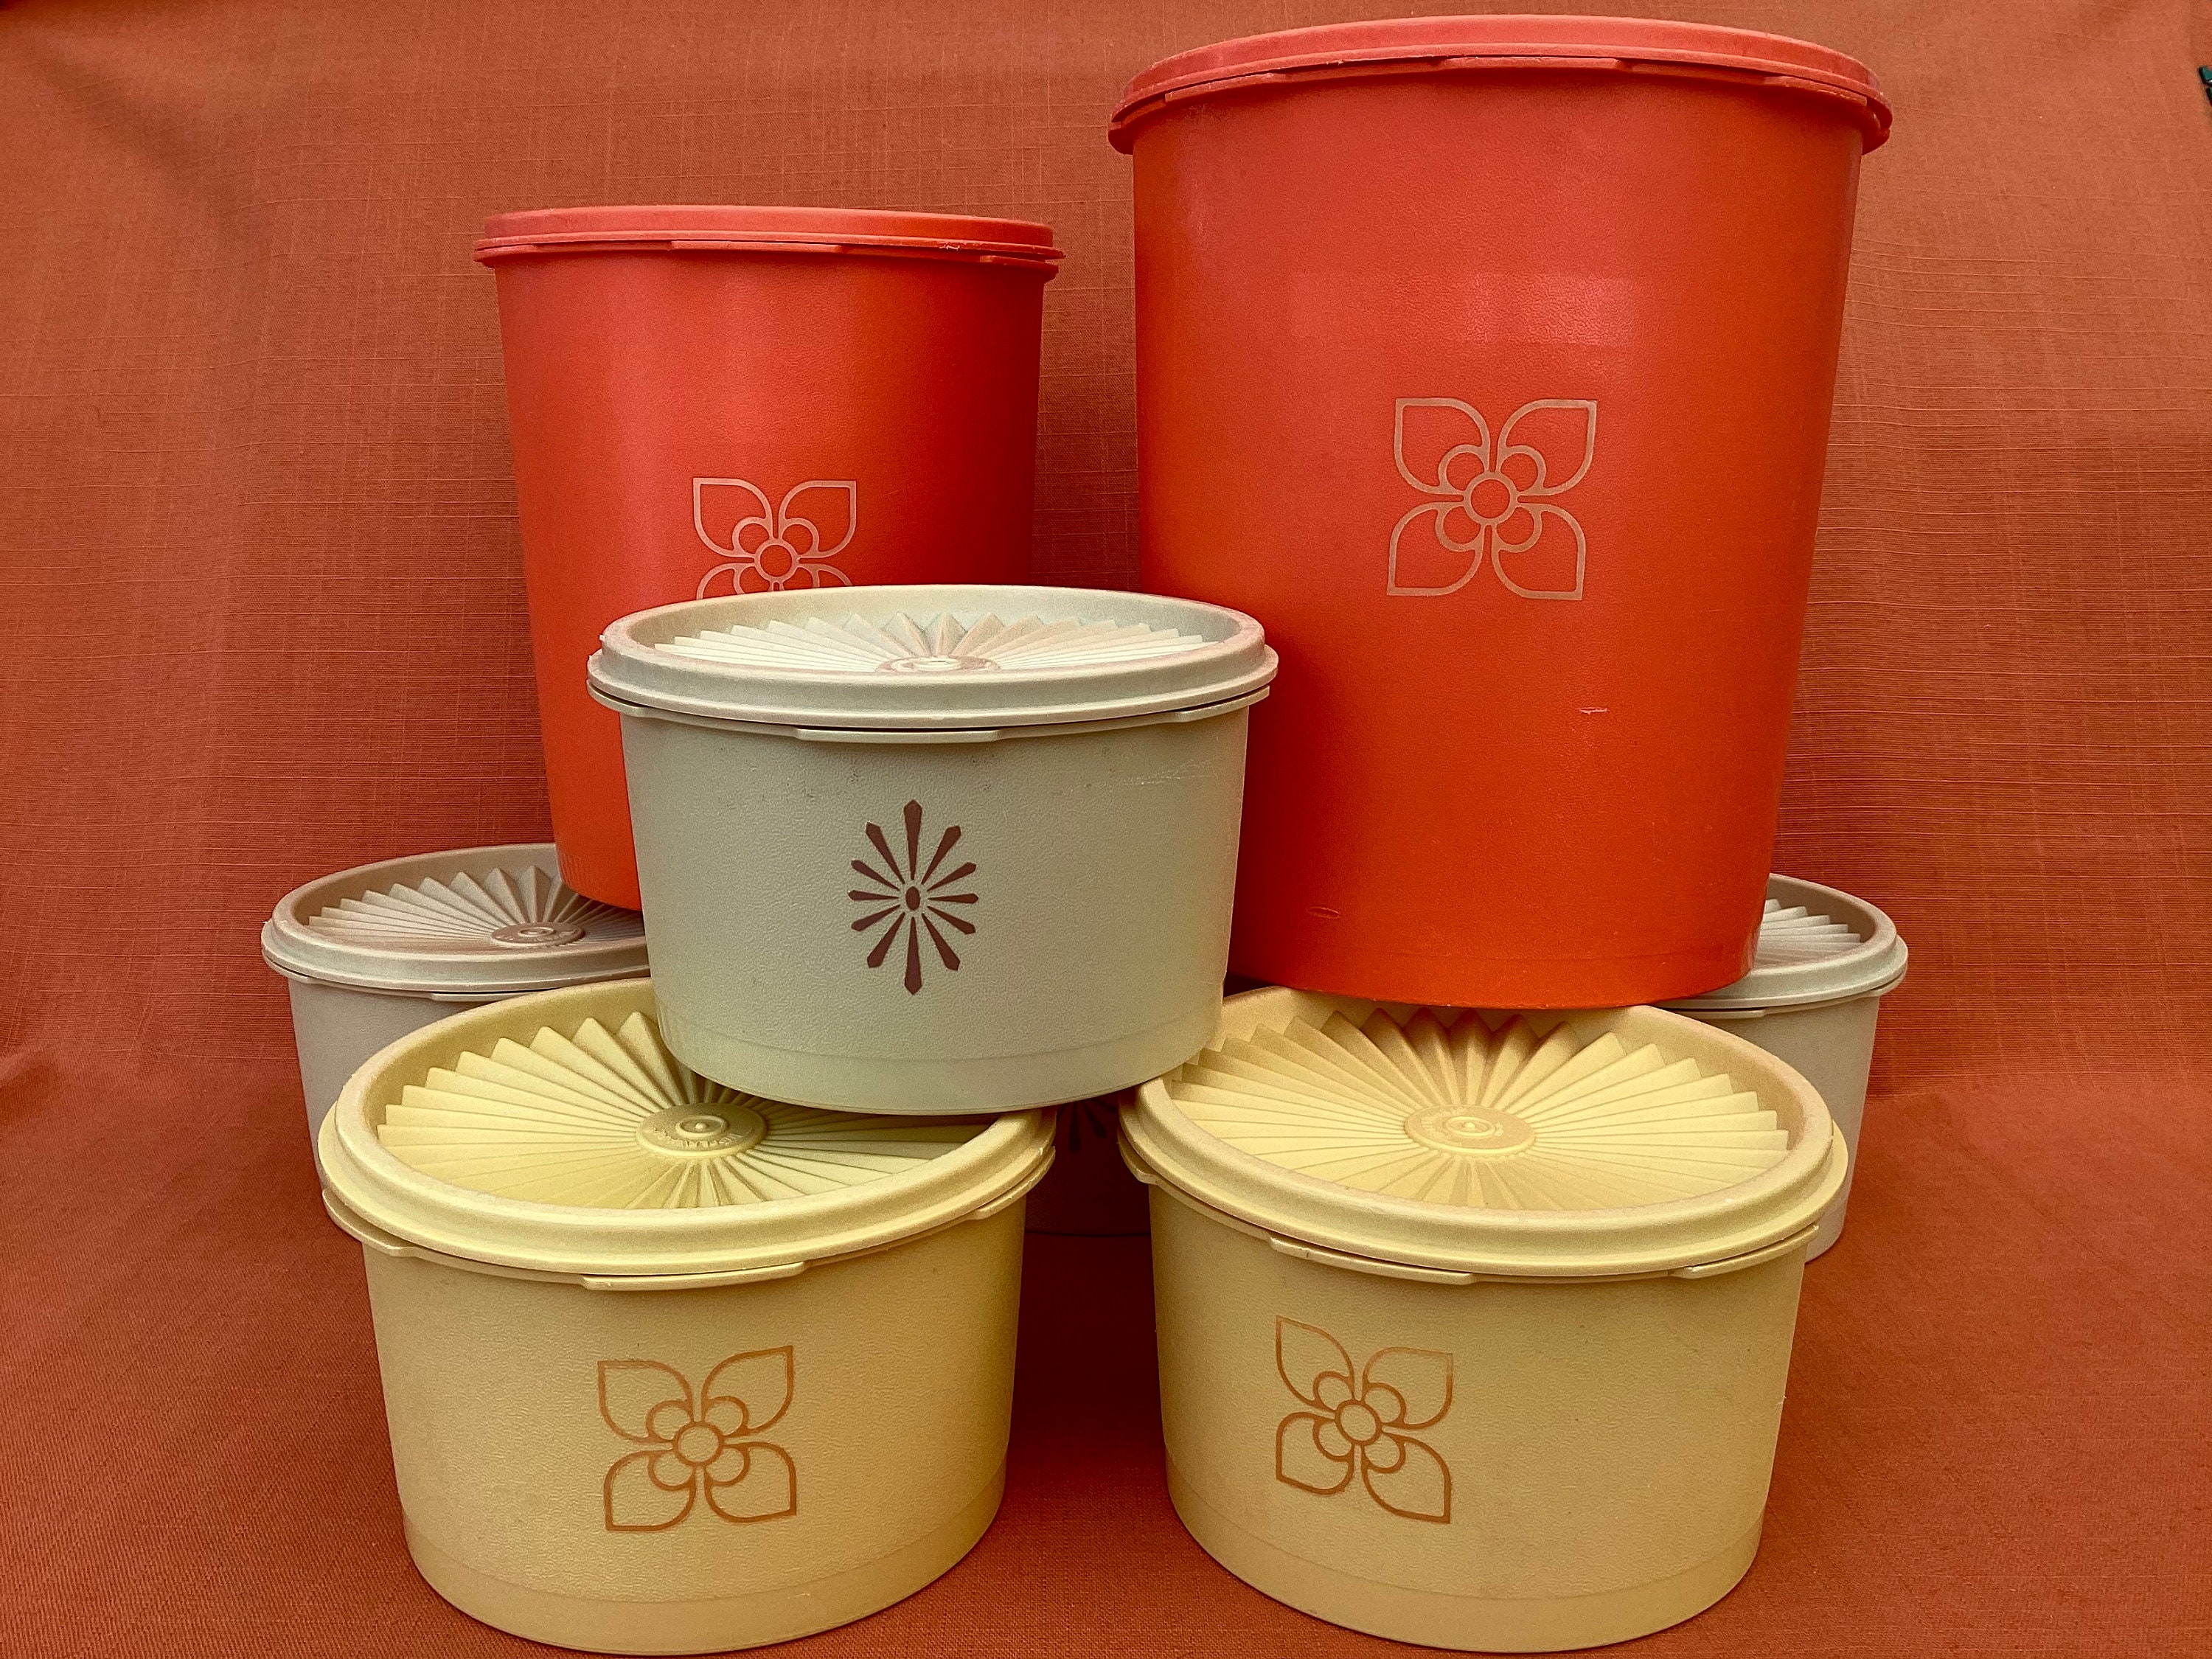 1970s Tupperware Storage Containers With Lids - Finland